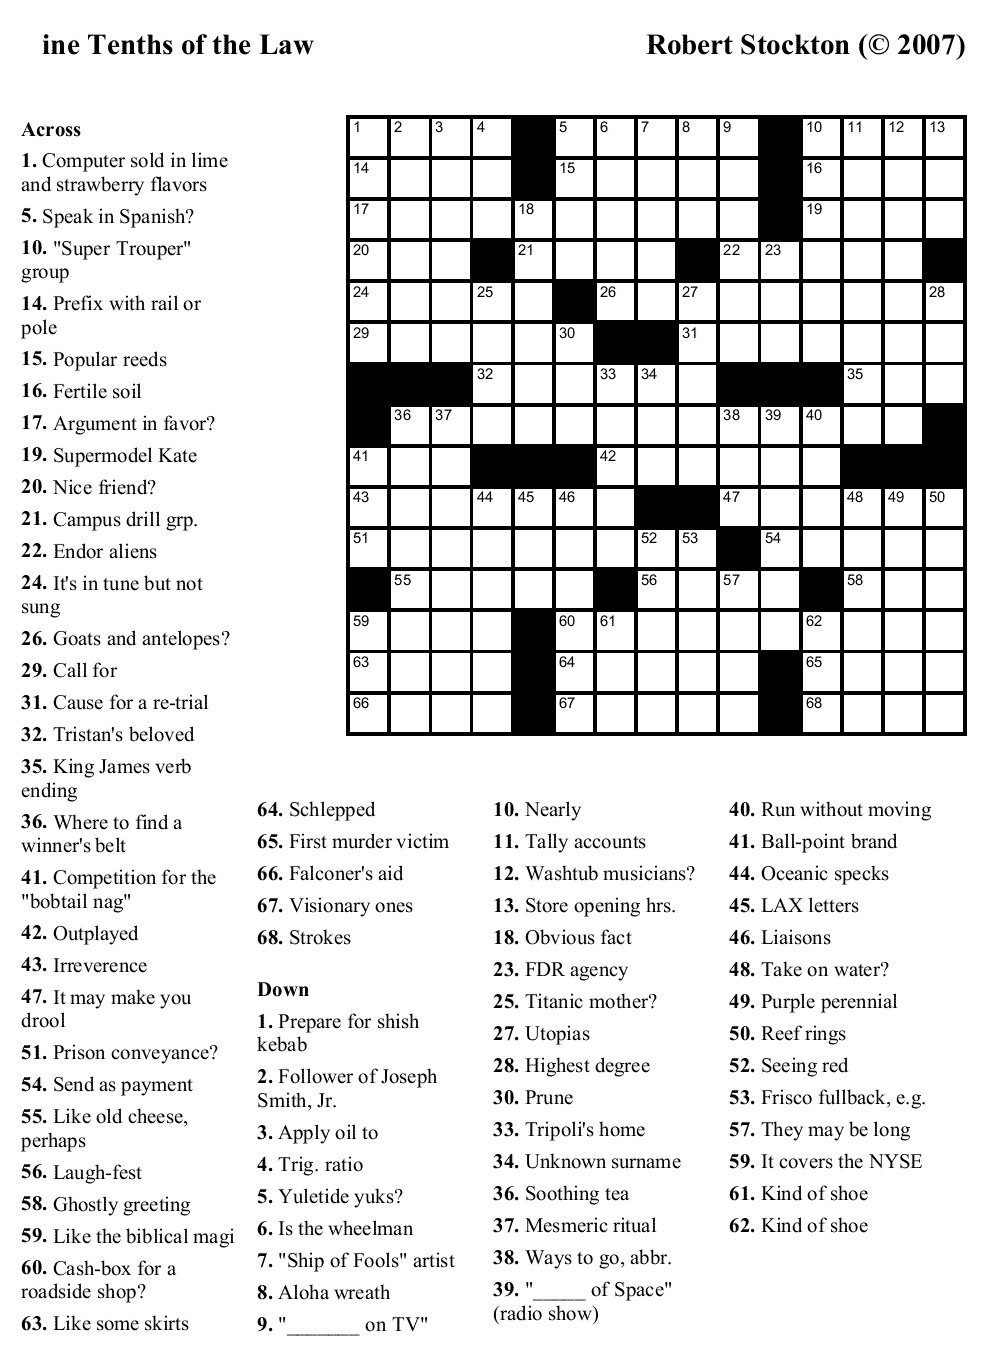 Crossword Puzzles Printable - Yahoo Image Search Results | Crossword - Printable Crossword Puzzles With Pictures